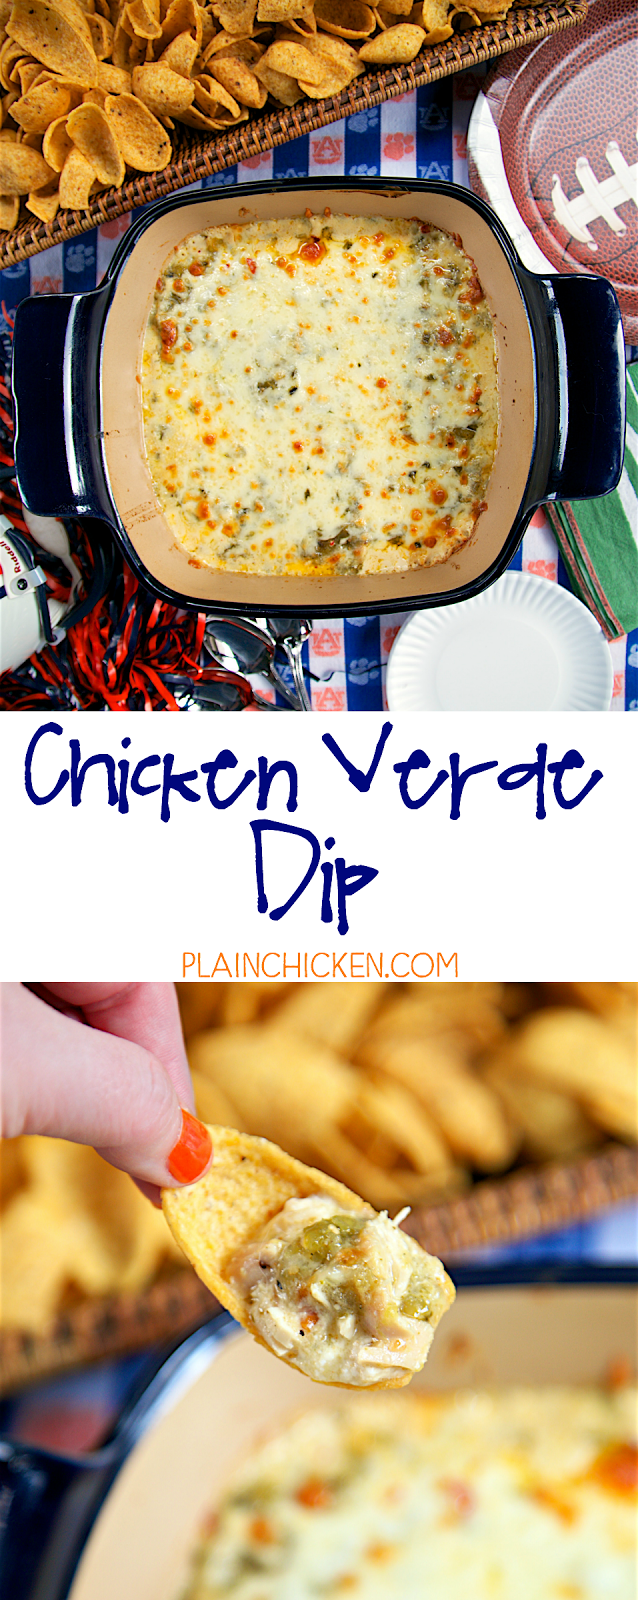 Chicken Verde Dip - cream cheese, southwest seasoning, chicken, salsa verde and pepper jack cheese - OMG! This stuff is crazy good! We couldn't stop eating it! Can you make ahead of time and refrigerate until ready to bake. This didn't last long at our party!